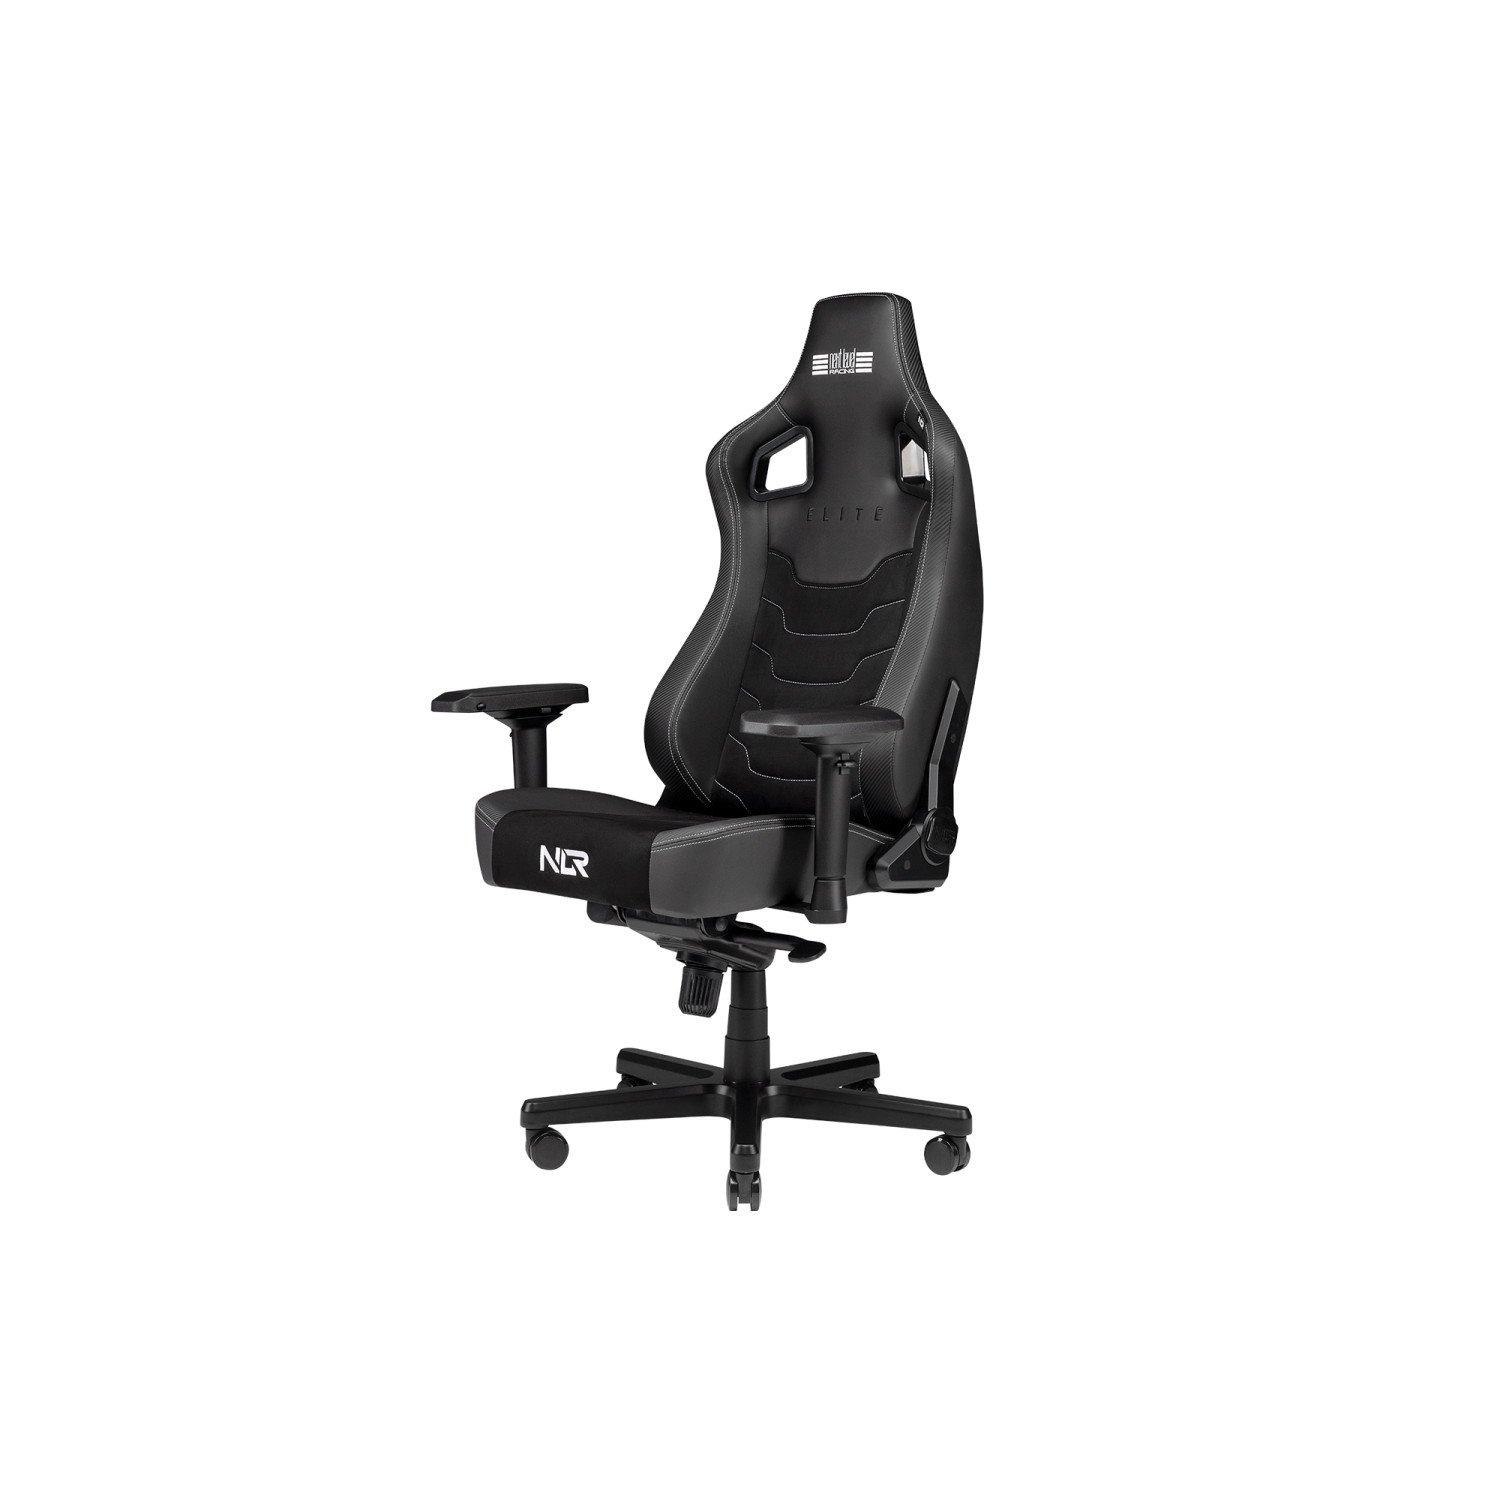 Browse Chairs | Toys & | GameStop